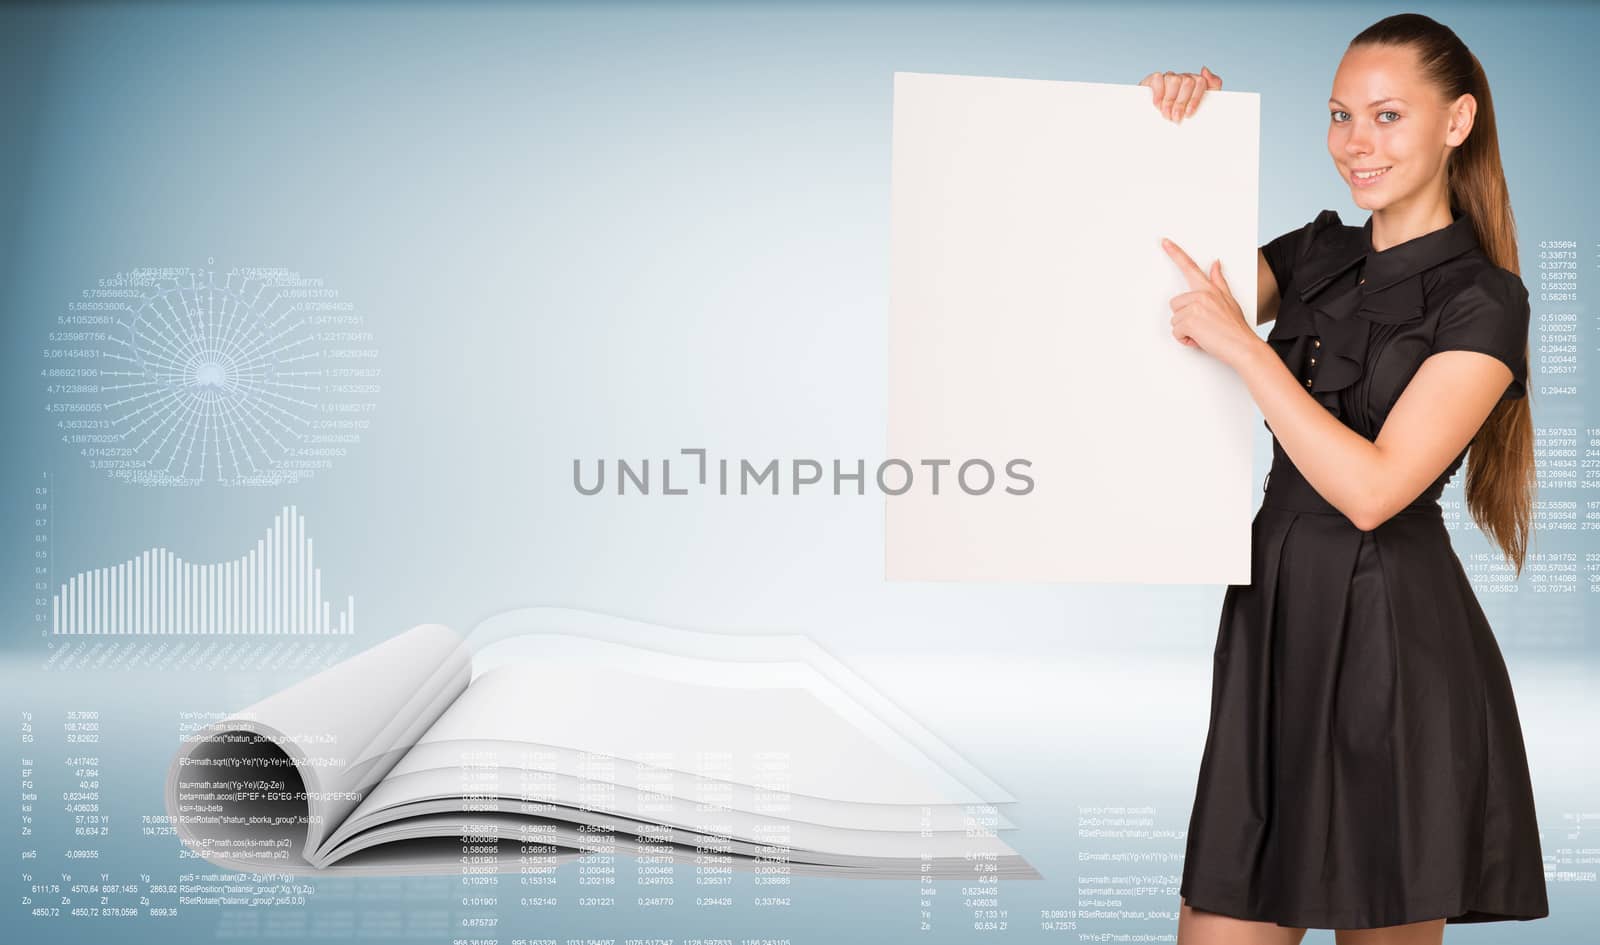 Businesswoman holding empty paper. Open book, graphs with text rows as backdrop